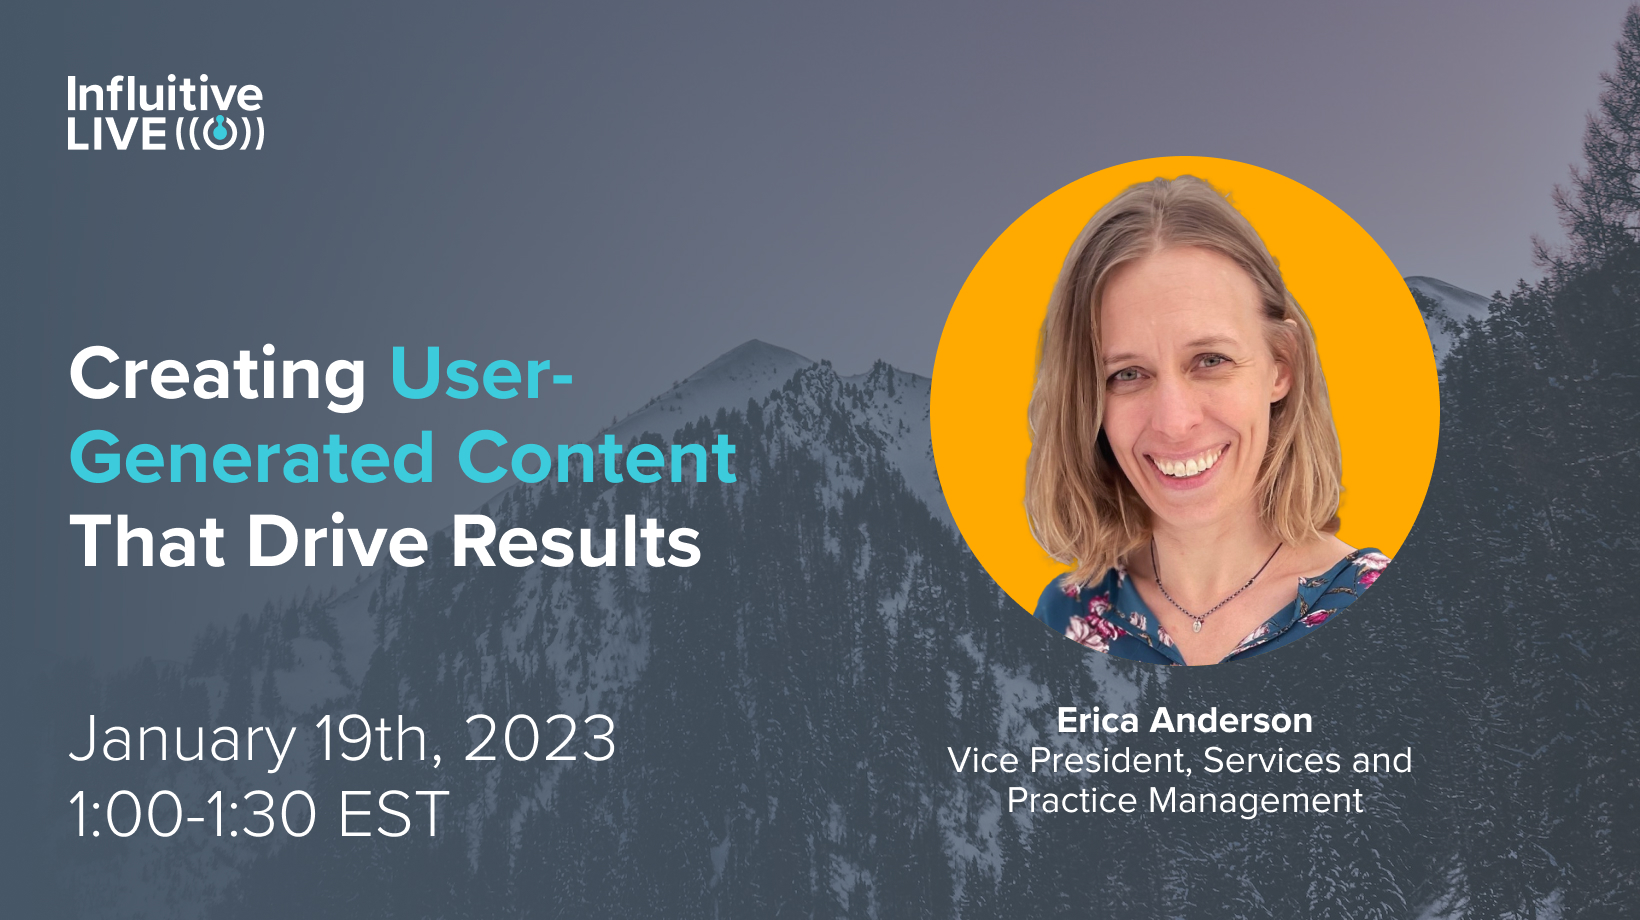 Creating User-Generated Content That Drives Results – Erica Anderson (Influitive)